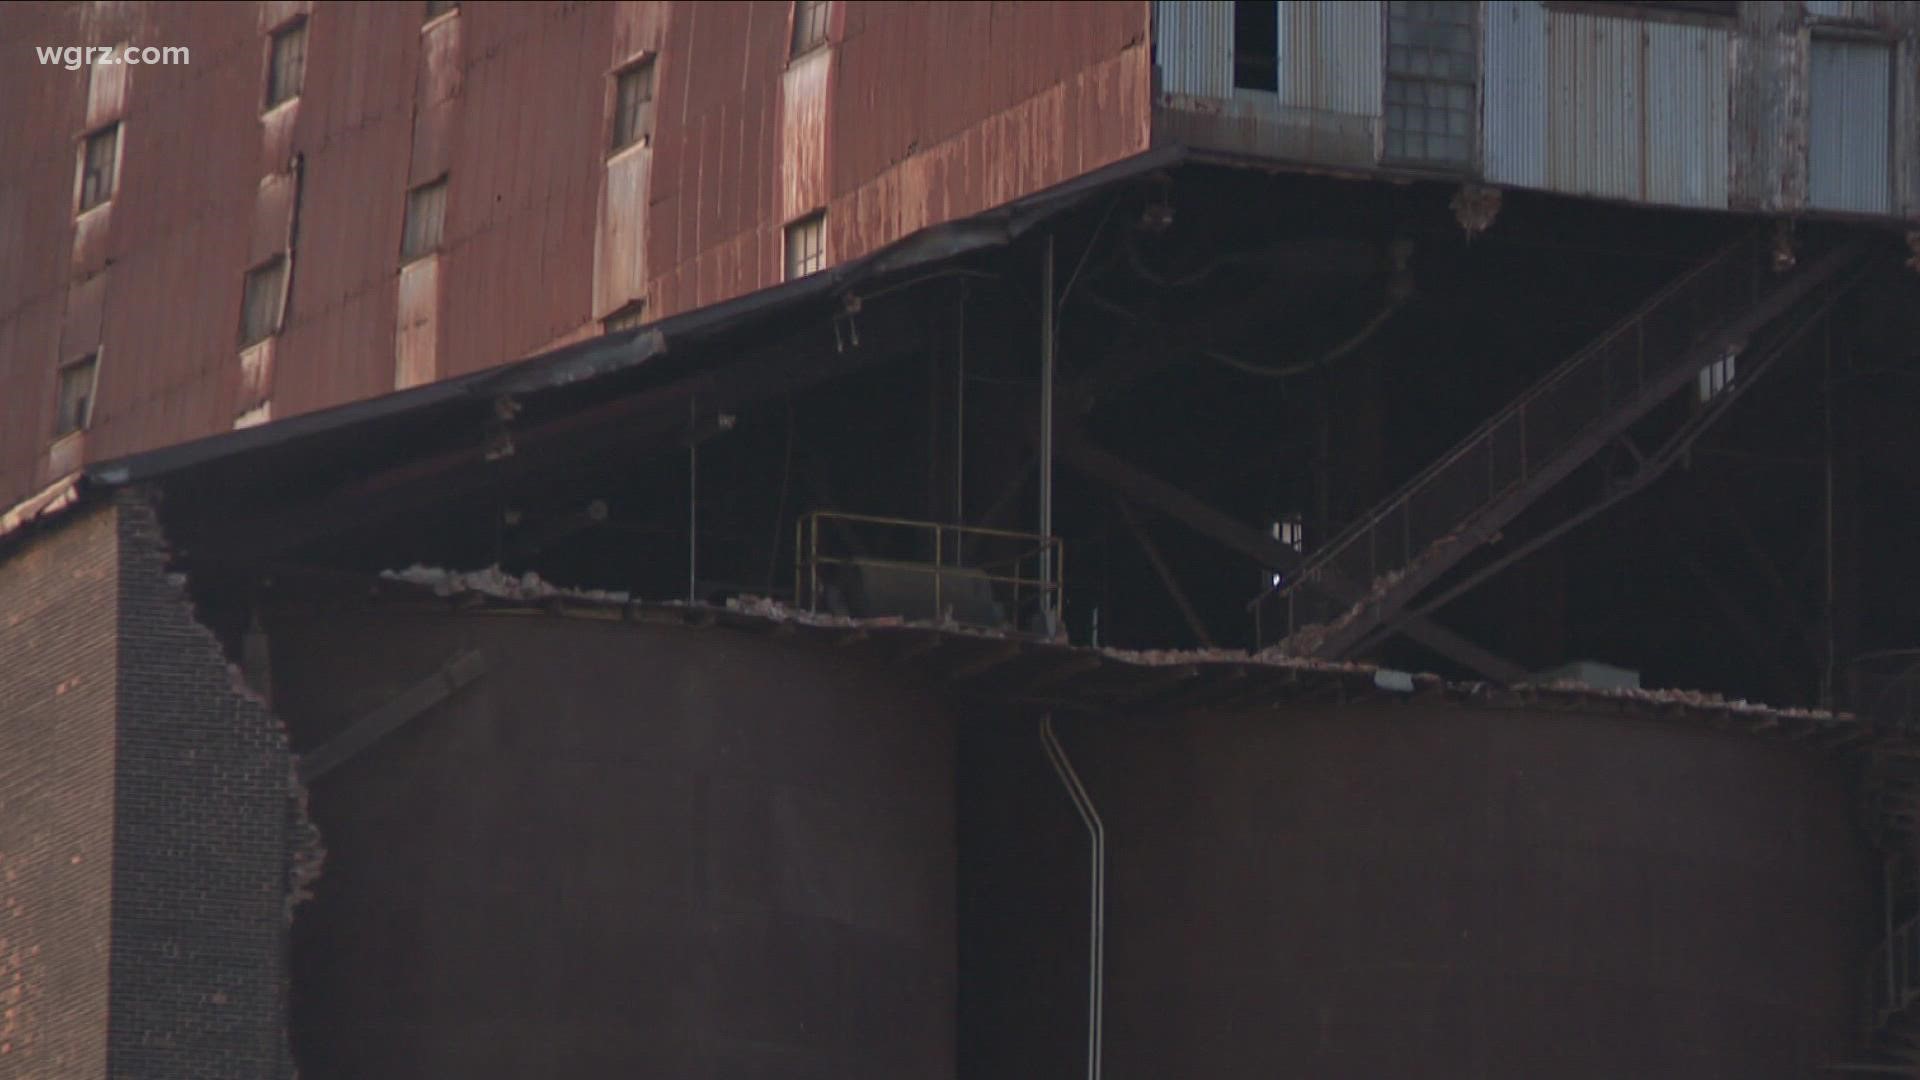 As folks clean up from that massive wind storm Saturday night, one structure that took a hit was the Great northern grain elevator on Ganson Street.